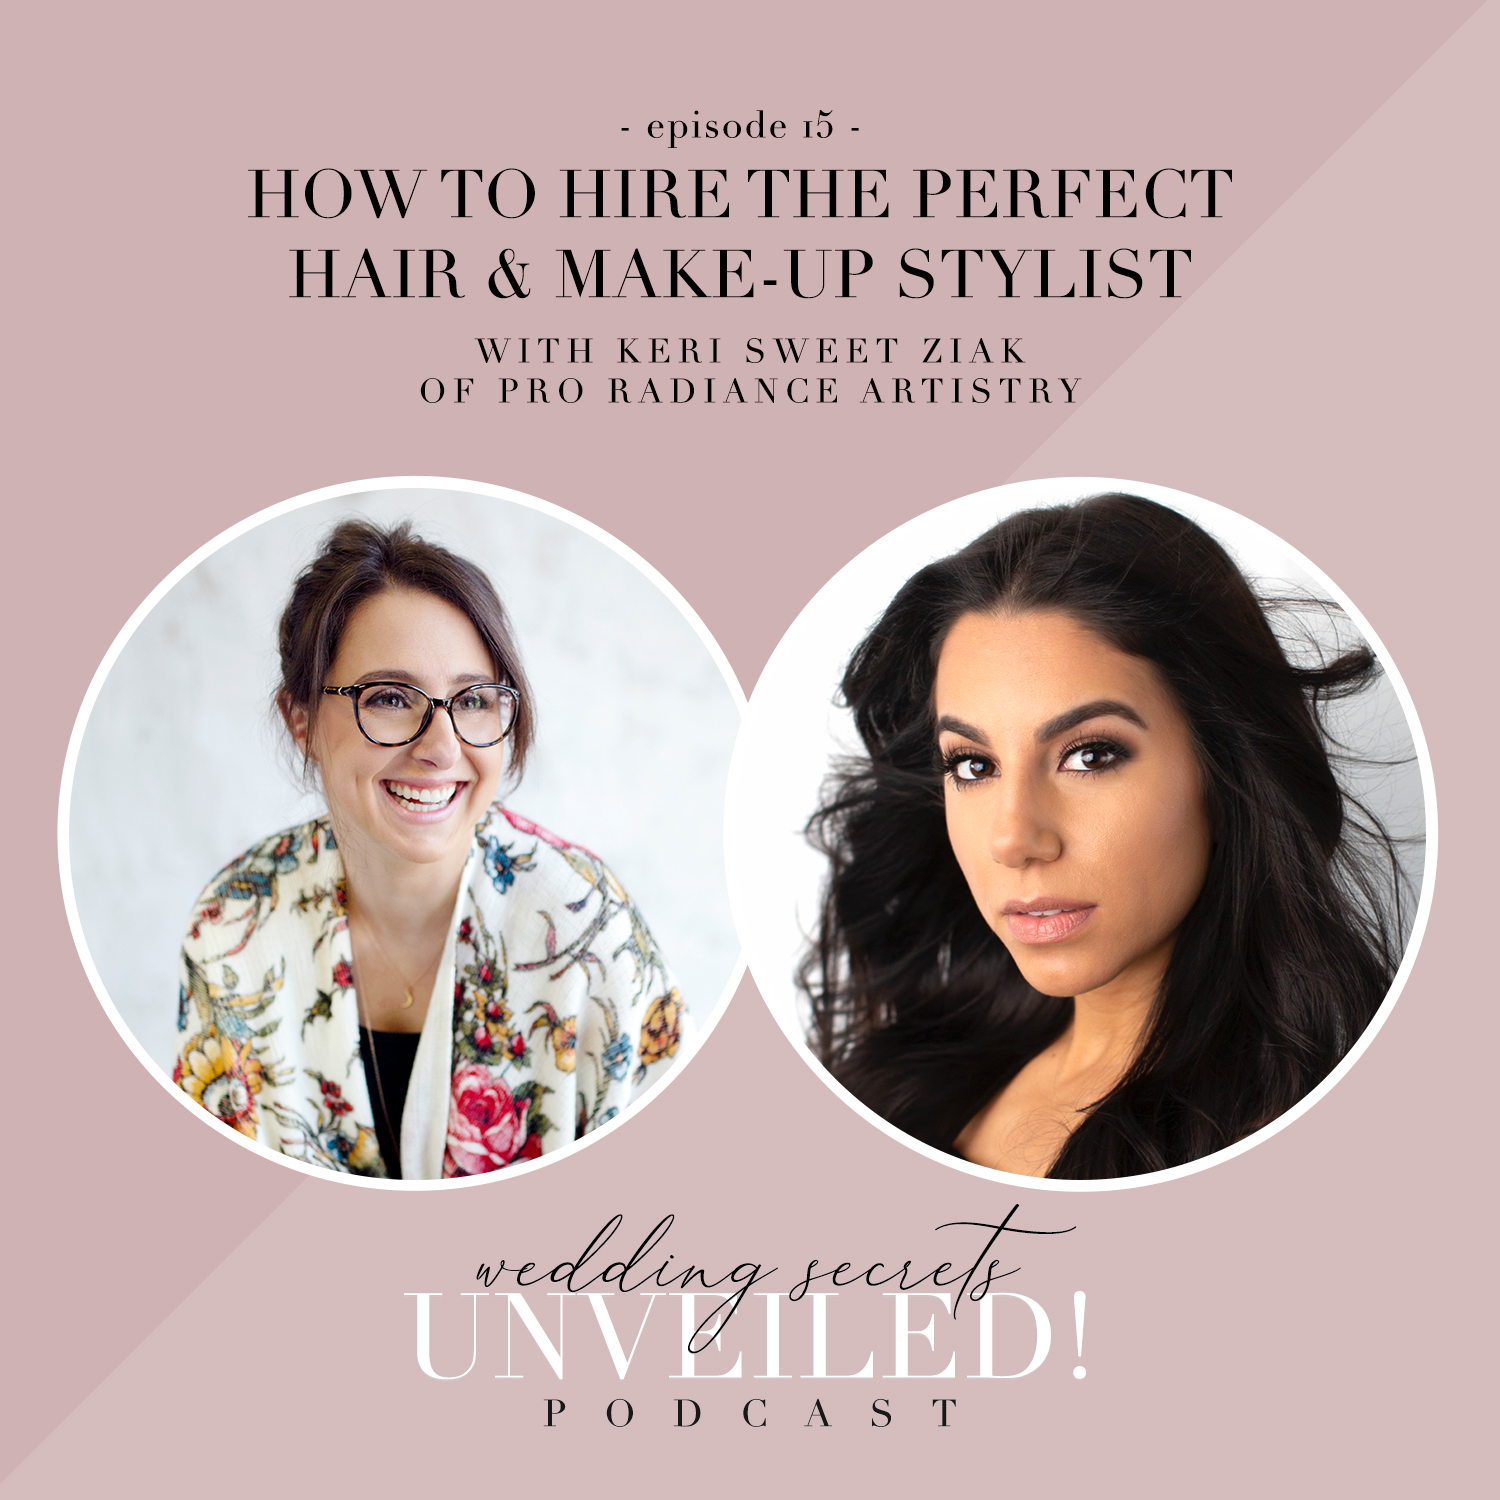 how to hire the perfect beauty stylists for your wedding day shared by Pro Radiance Artistry on the Wedding Secrets Unveiled! podcast 